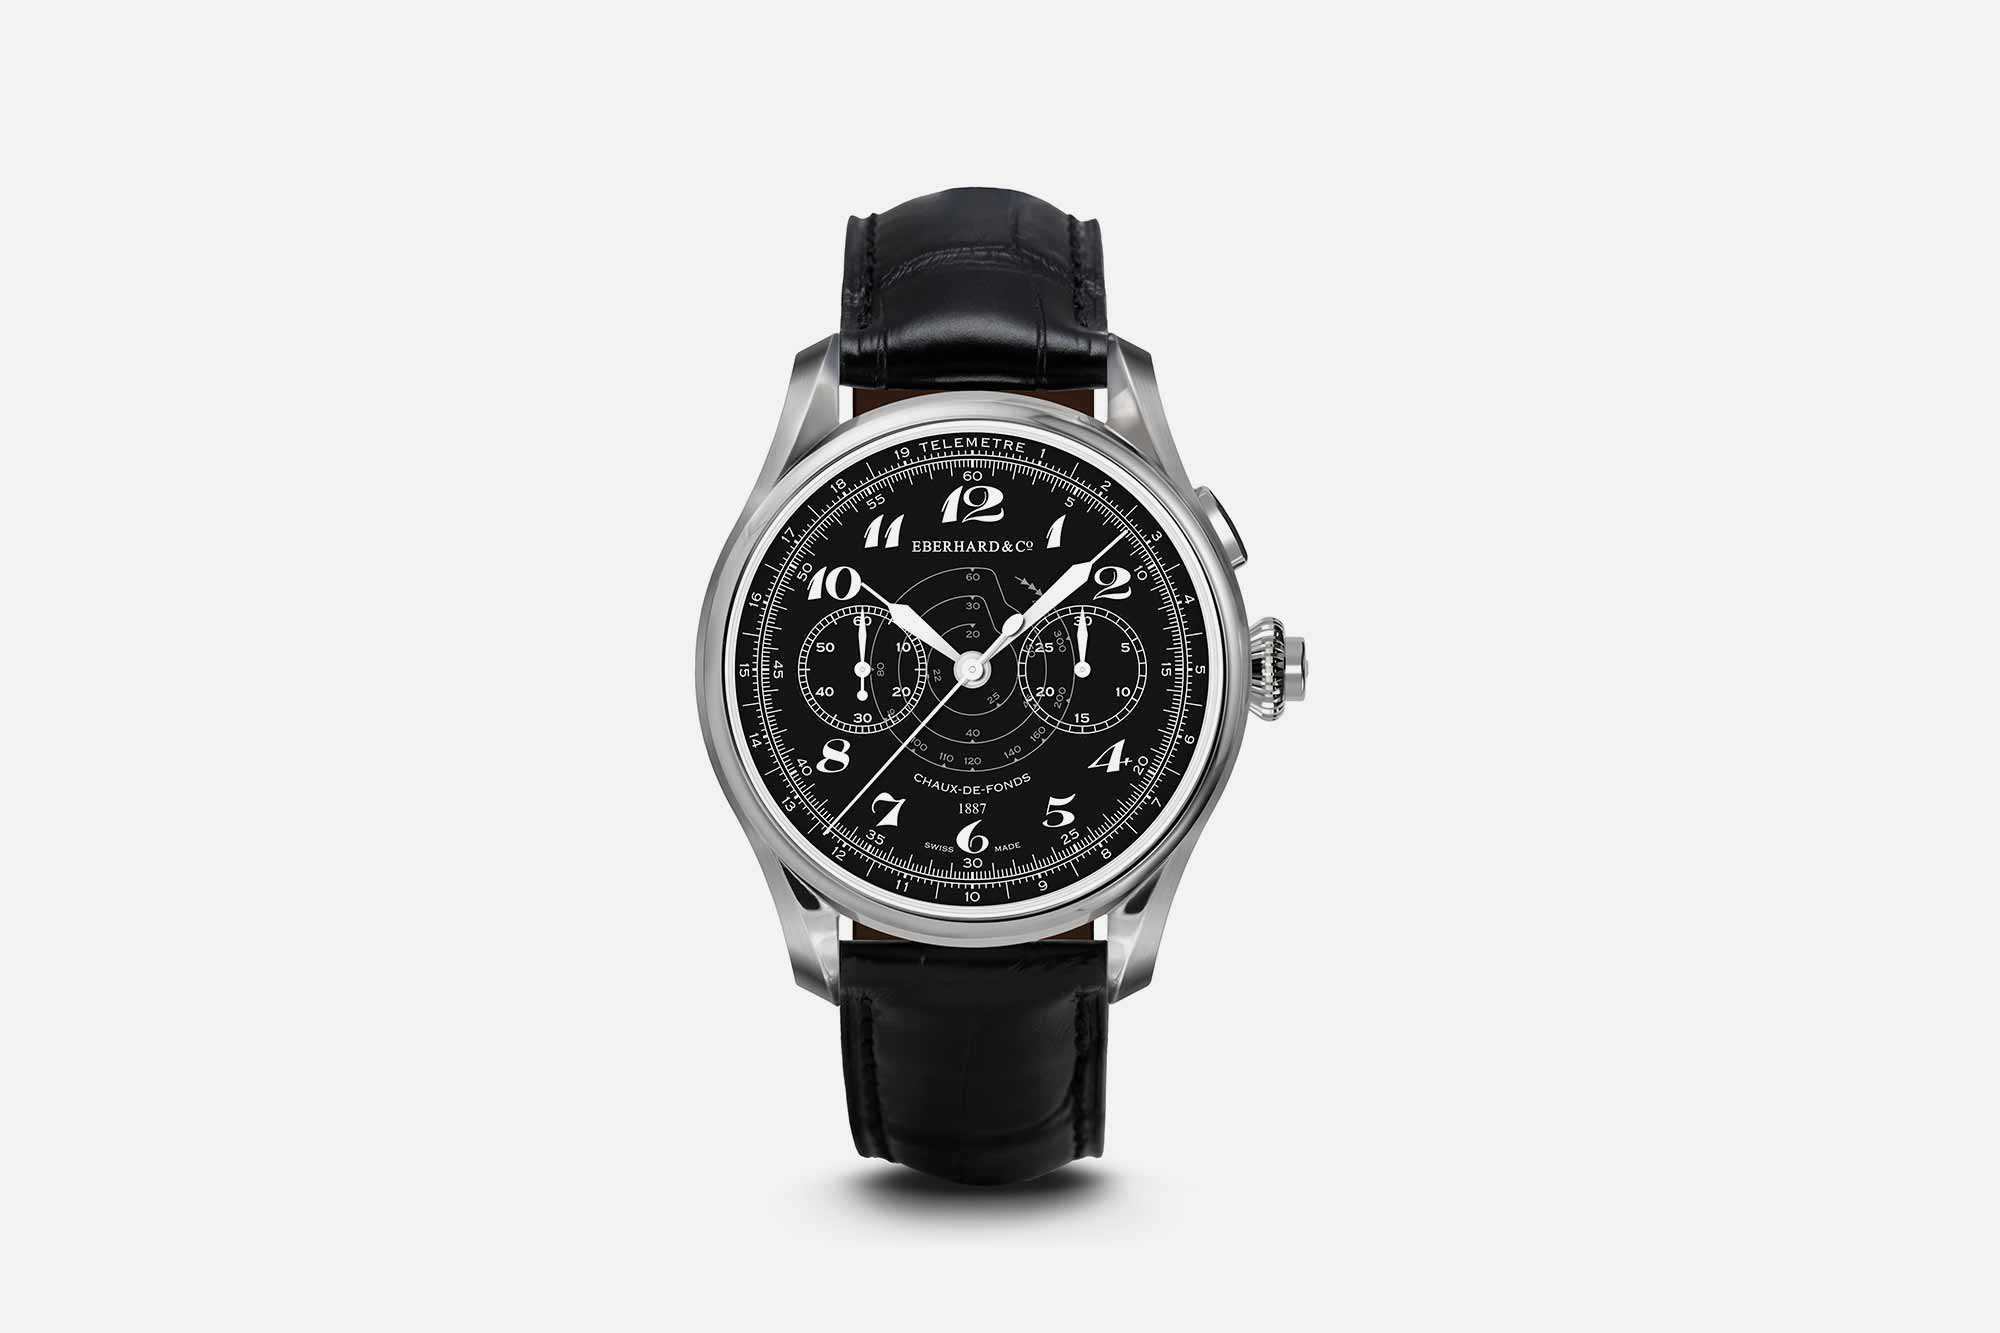 Frederique Constant Rings in Black Friday with the All Black Classics Worldtimer Manufacture Globetrotter Limited Edition